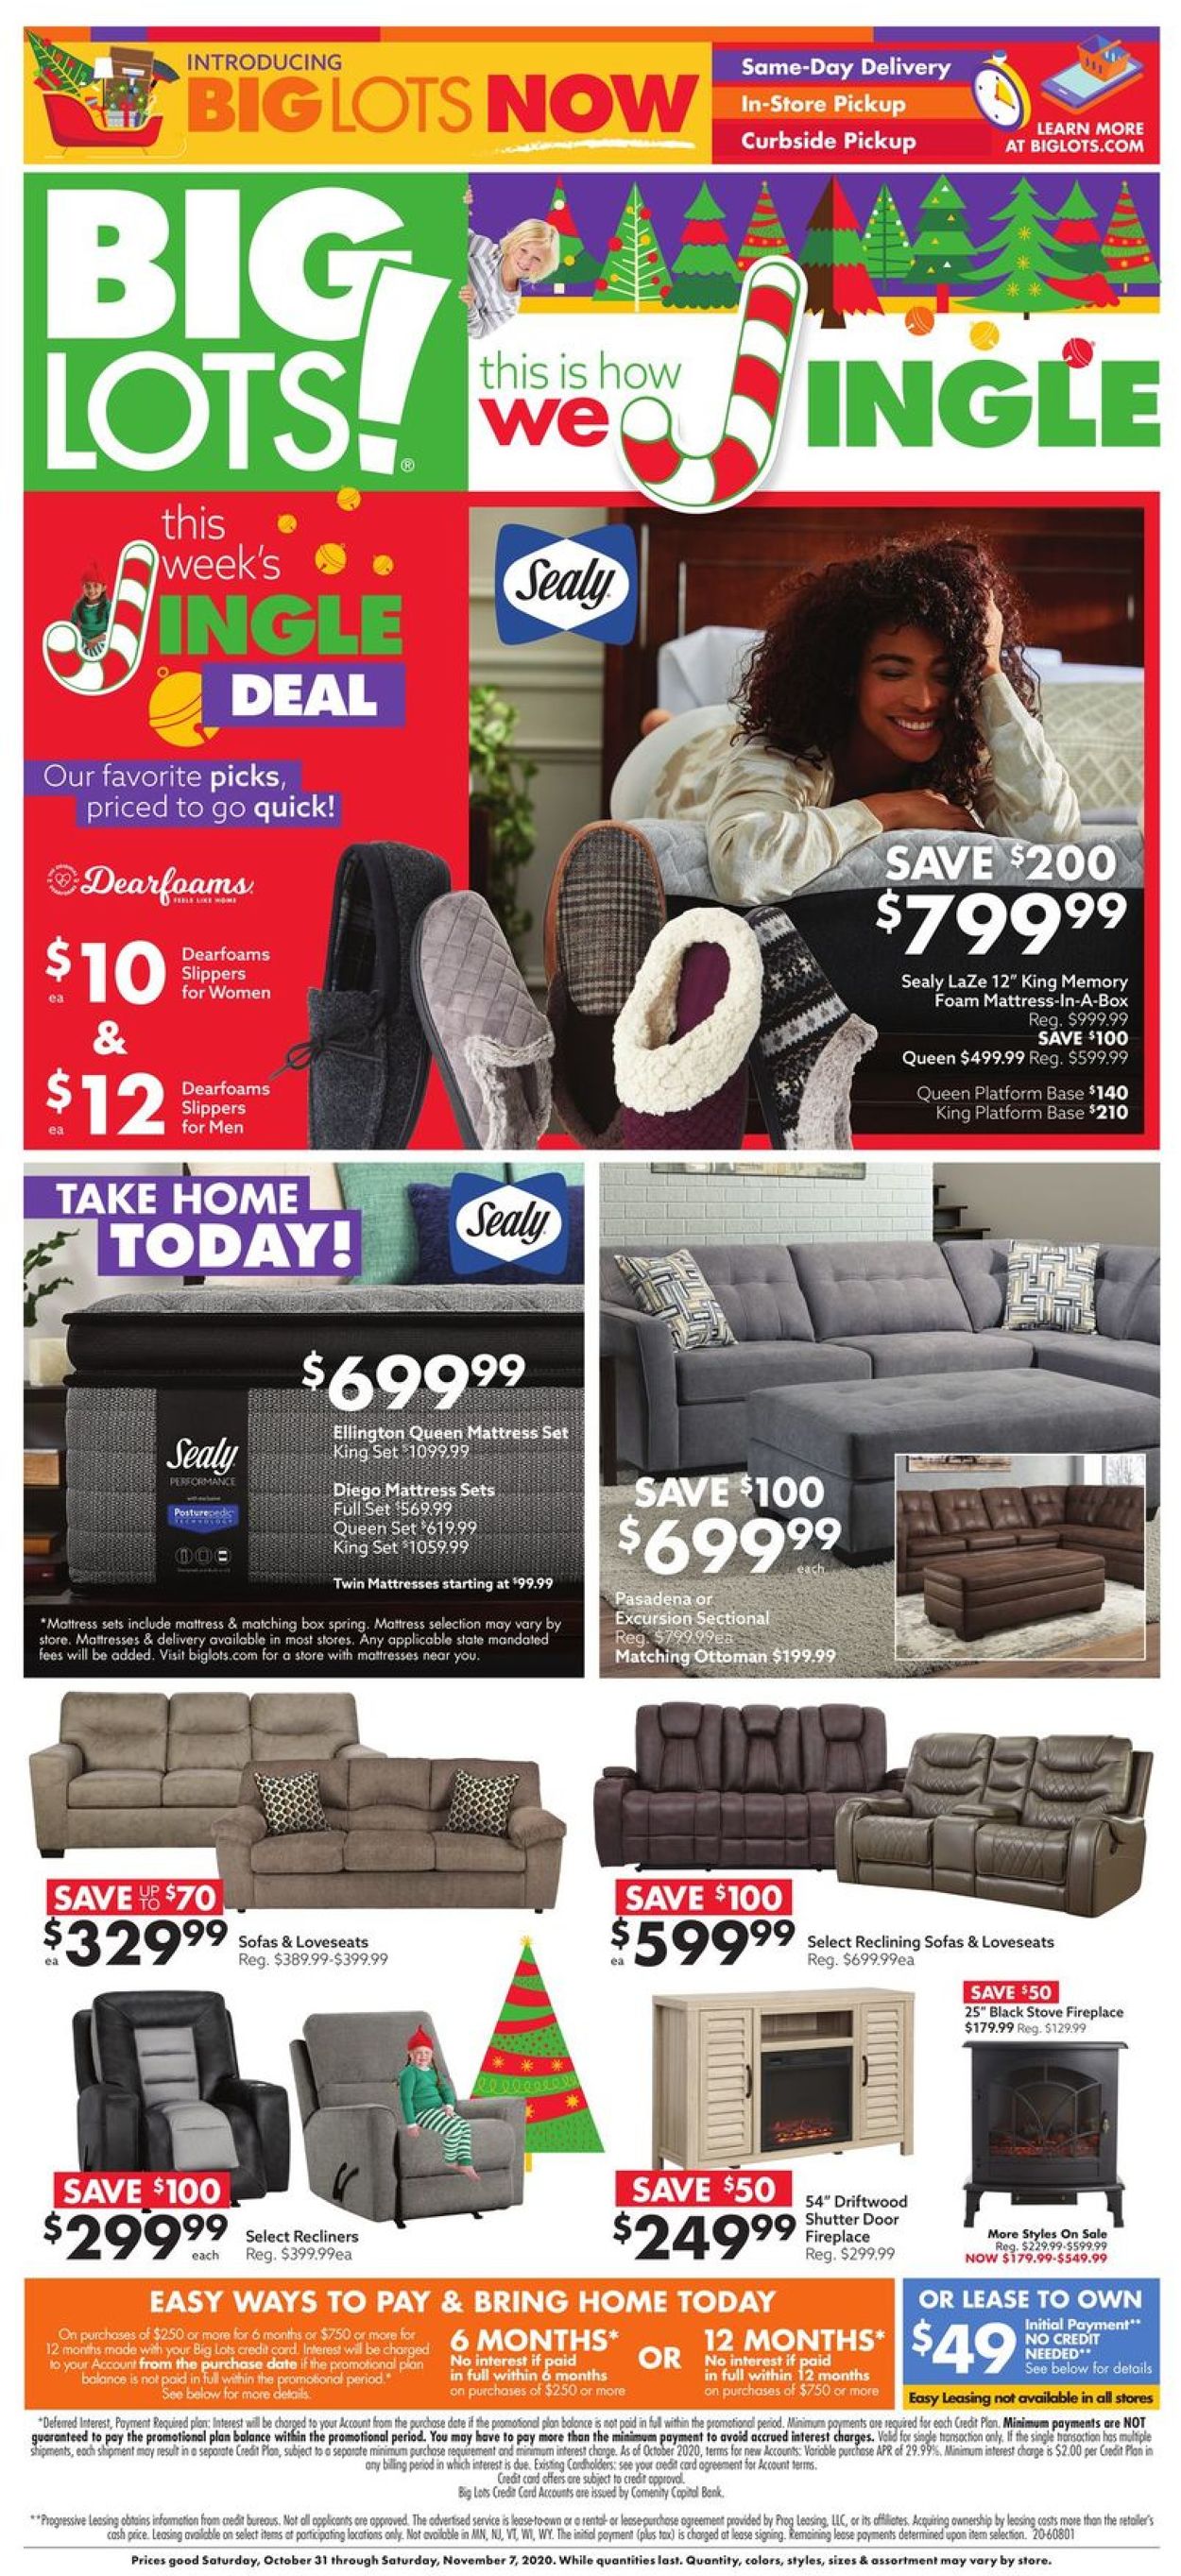 Big Lots Holiday 2020 Current weekly ad 10/31 11/07/2020 frequent